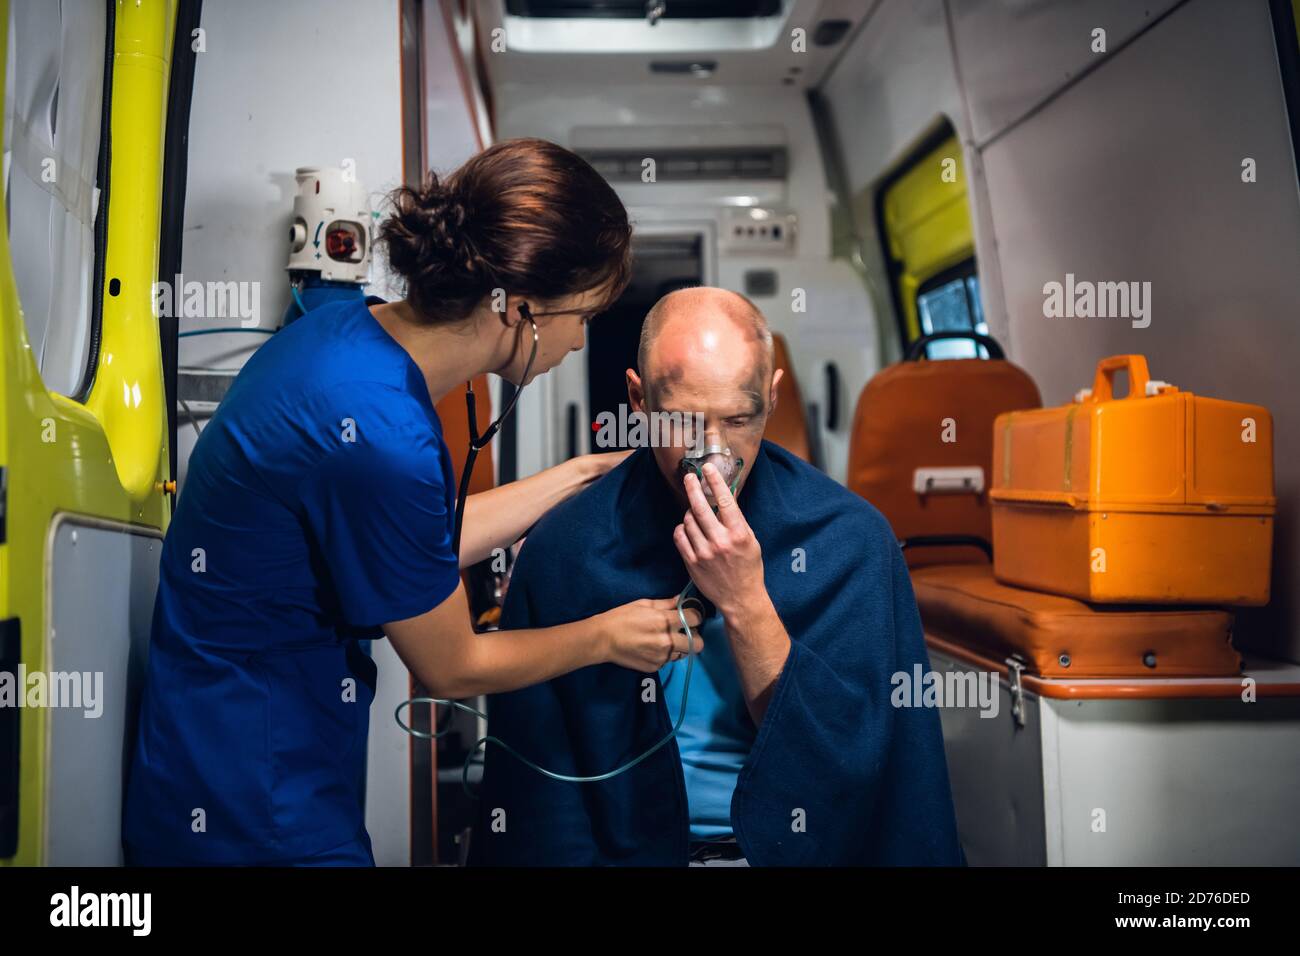 A young doctor with a stethoscope is taking care of her injured patient in an ambulance car. Stock Photo